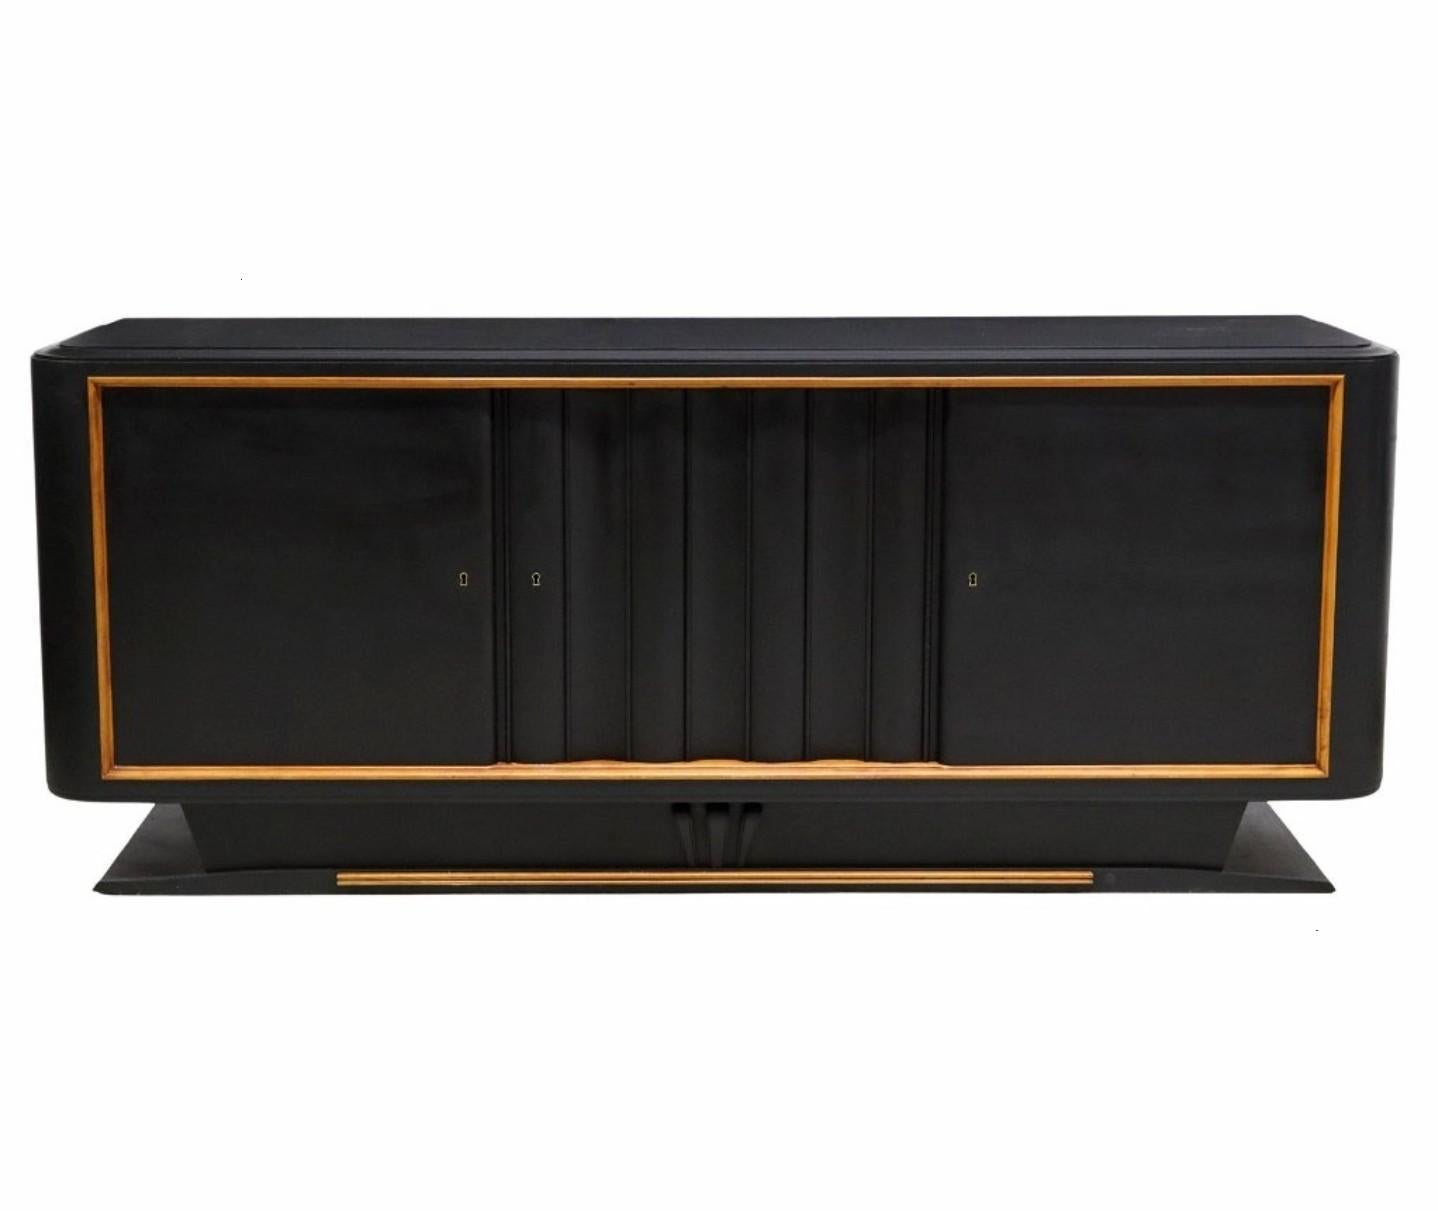 A magnificent vintage French Art Deco sideboard. circa 1930s/early 1940s

Hand-crafted in France in the mid-20th century, period Art Deco styling with Streamline Moderne - Hollywood Regency taste, featuring high-quality solid wood construction, in a